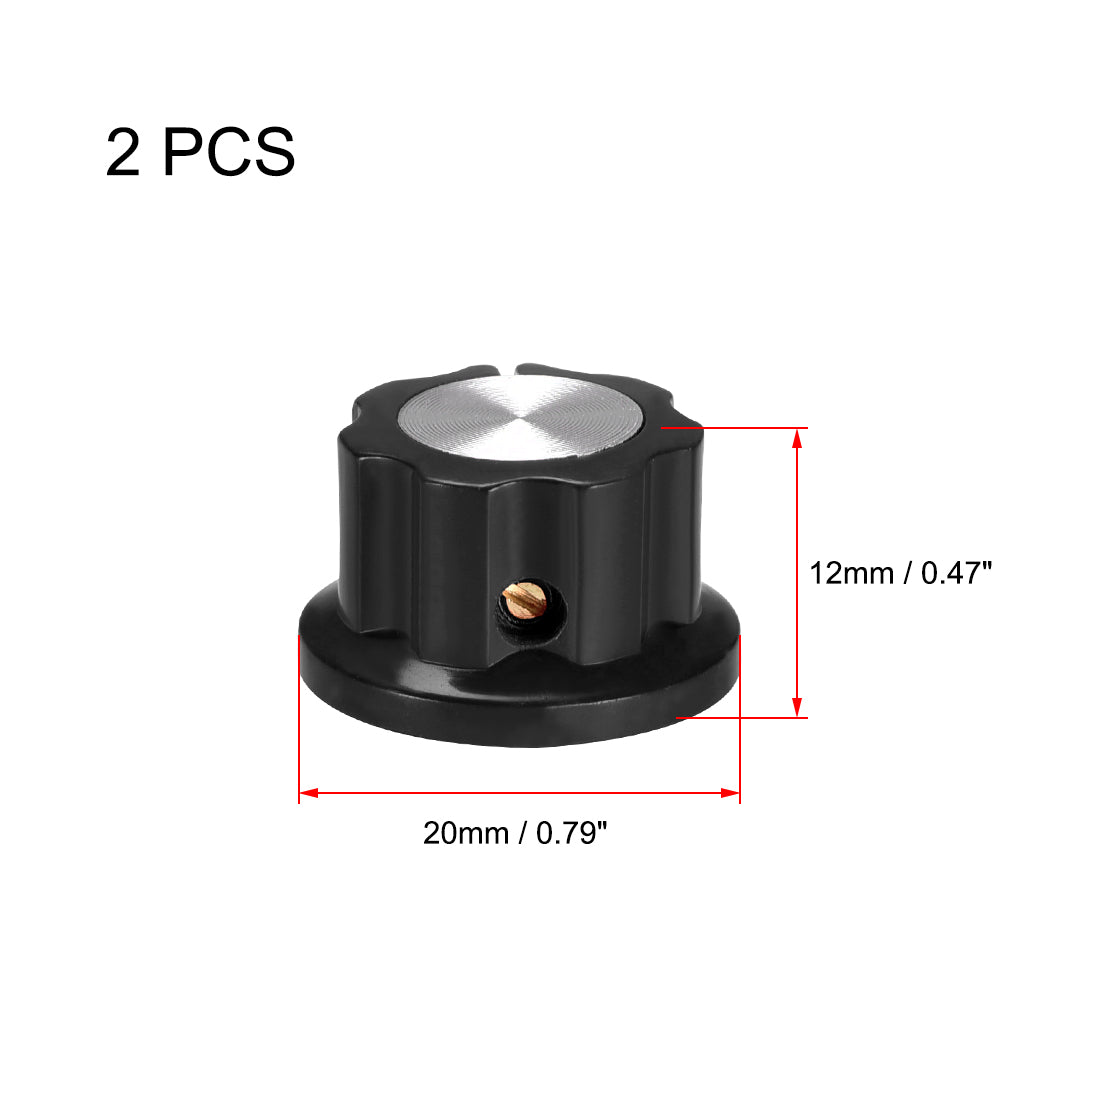 uxcell Uxcell 2pcs 6.4mm Shaft Hole Potentiometer Volume Control Rotary Knobs Effect Pedal Knobs Black